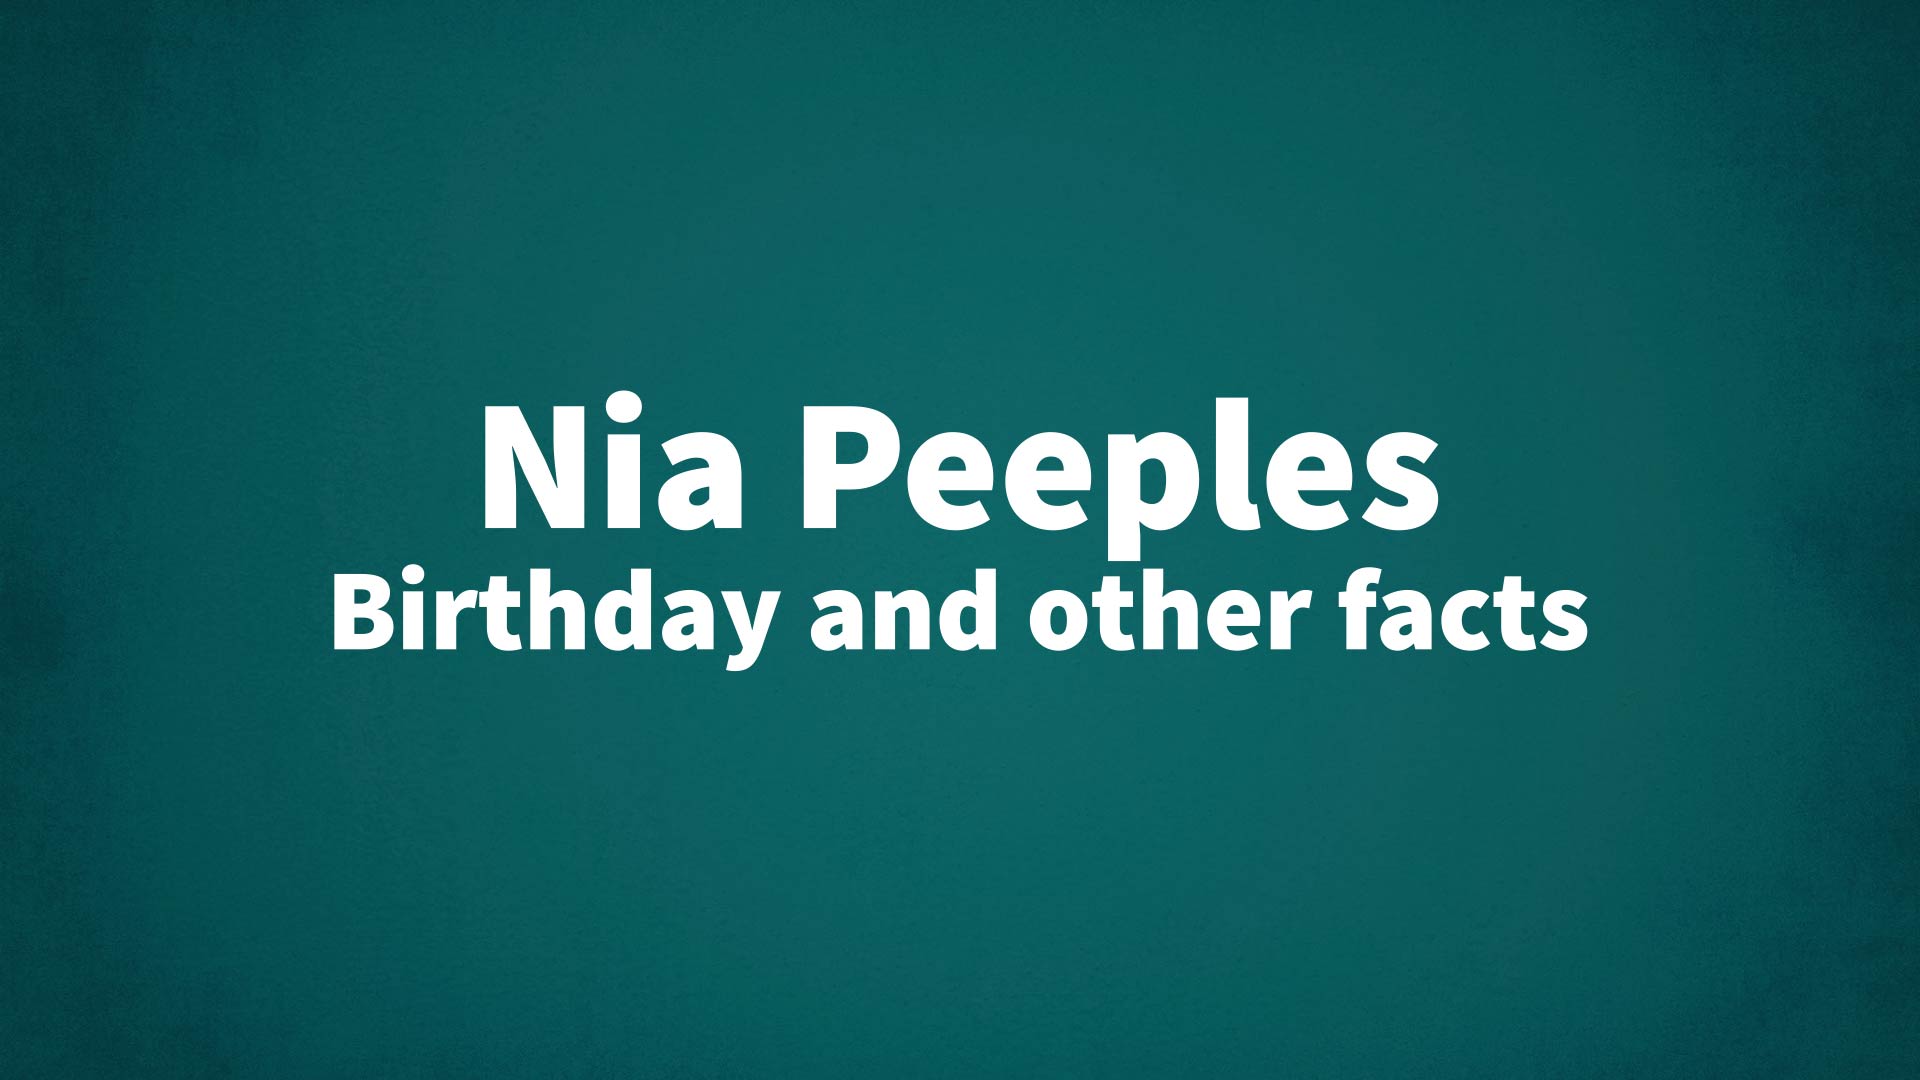 title image for Nia Peeples birthday